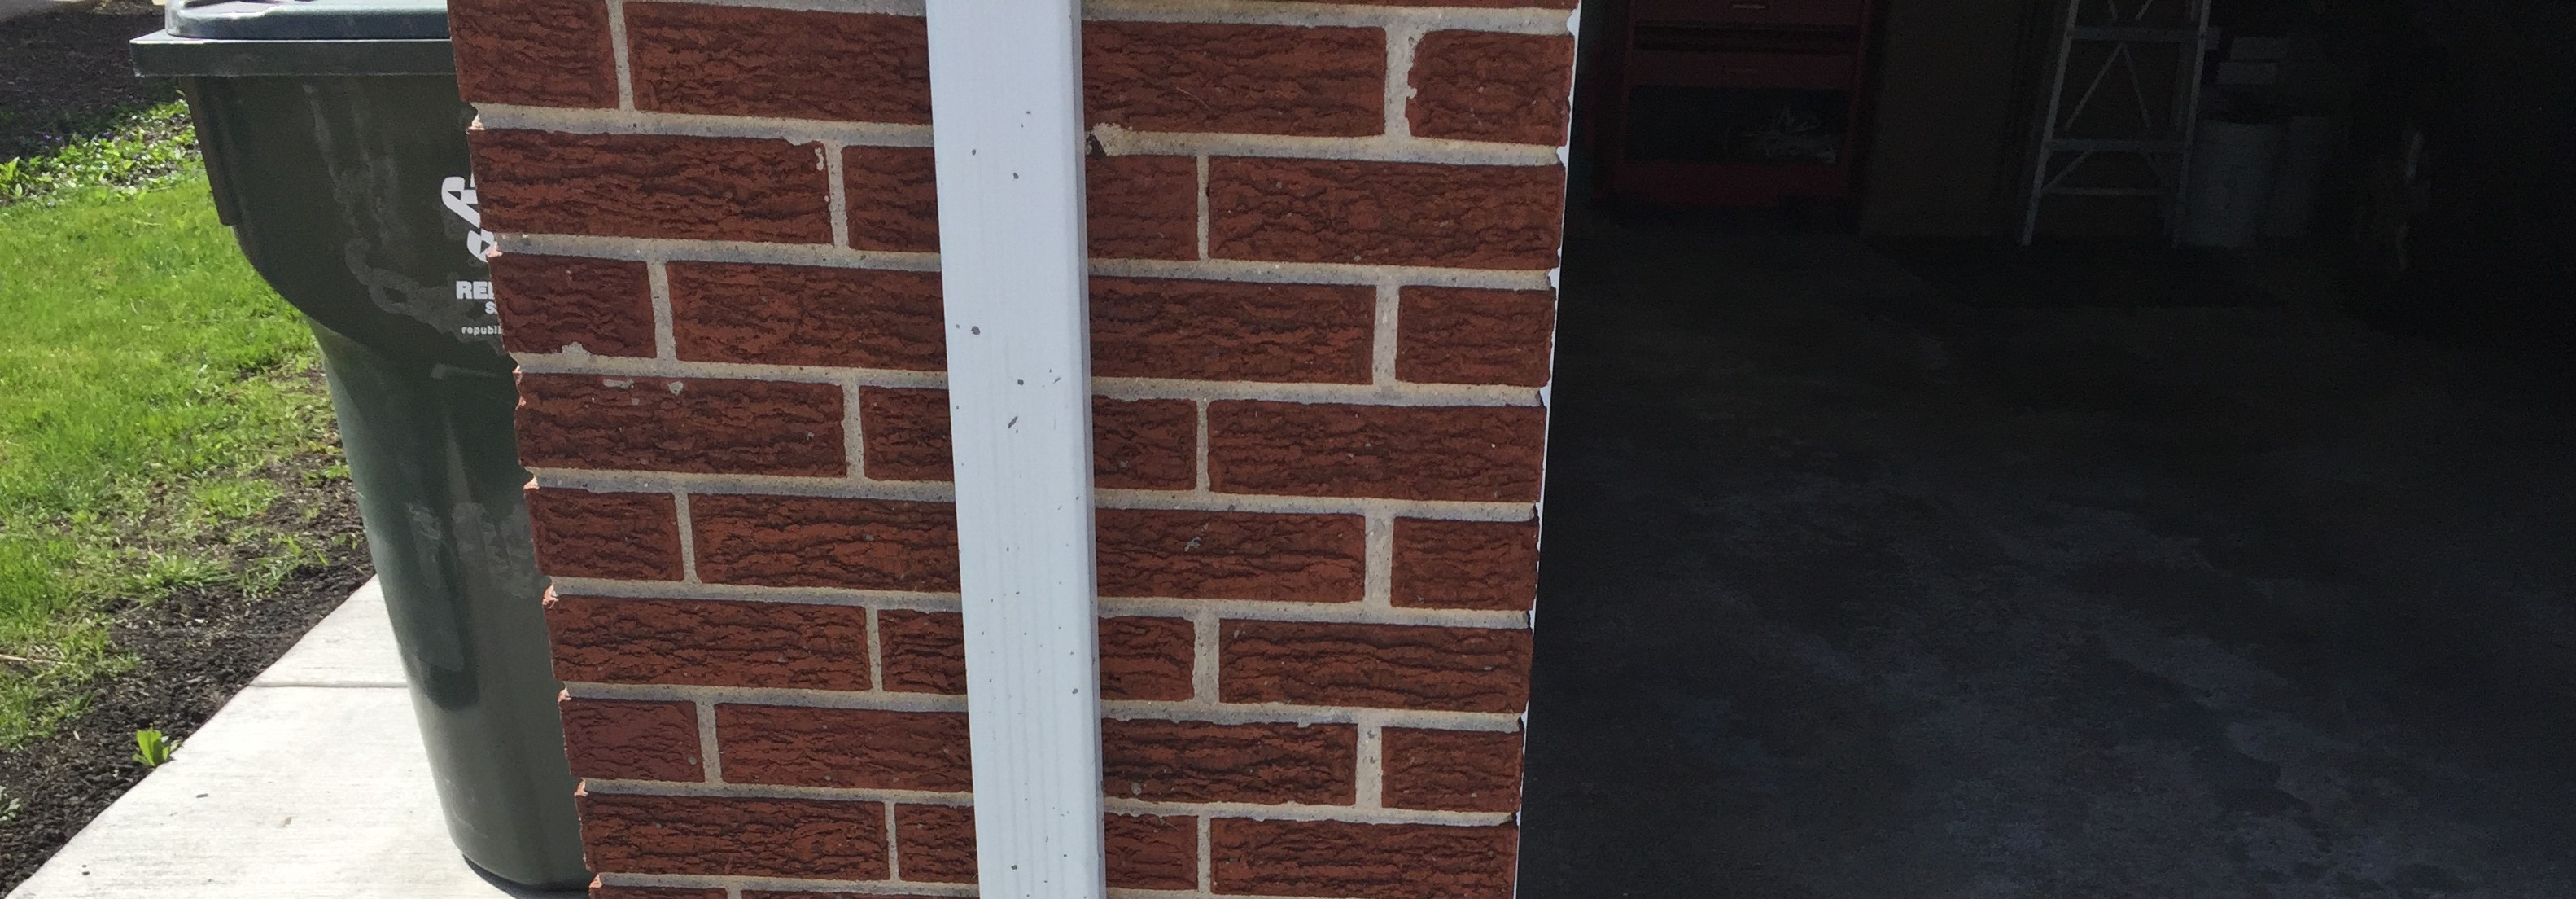 Remove and replace brick matching original mortar joints and color.